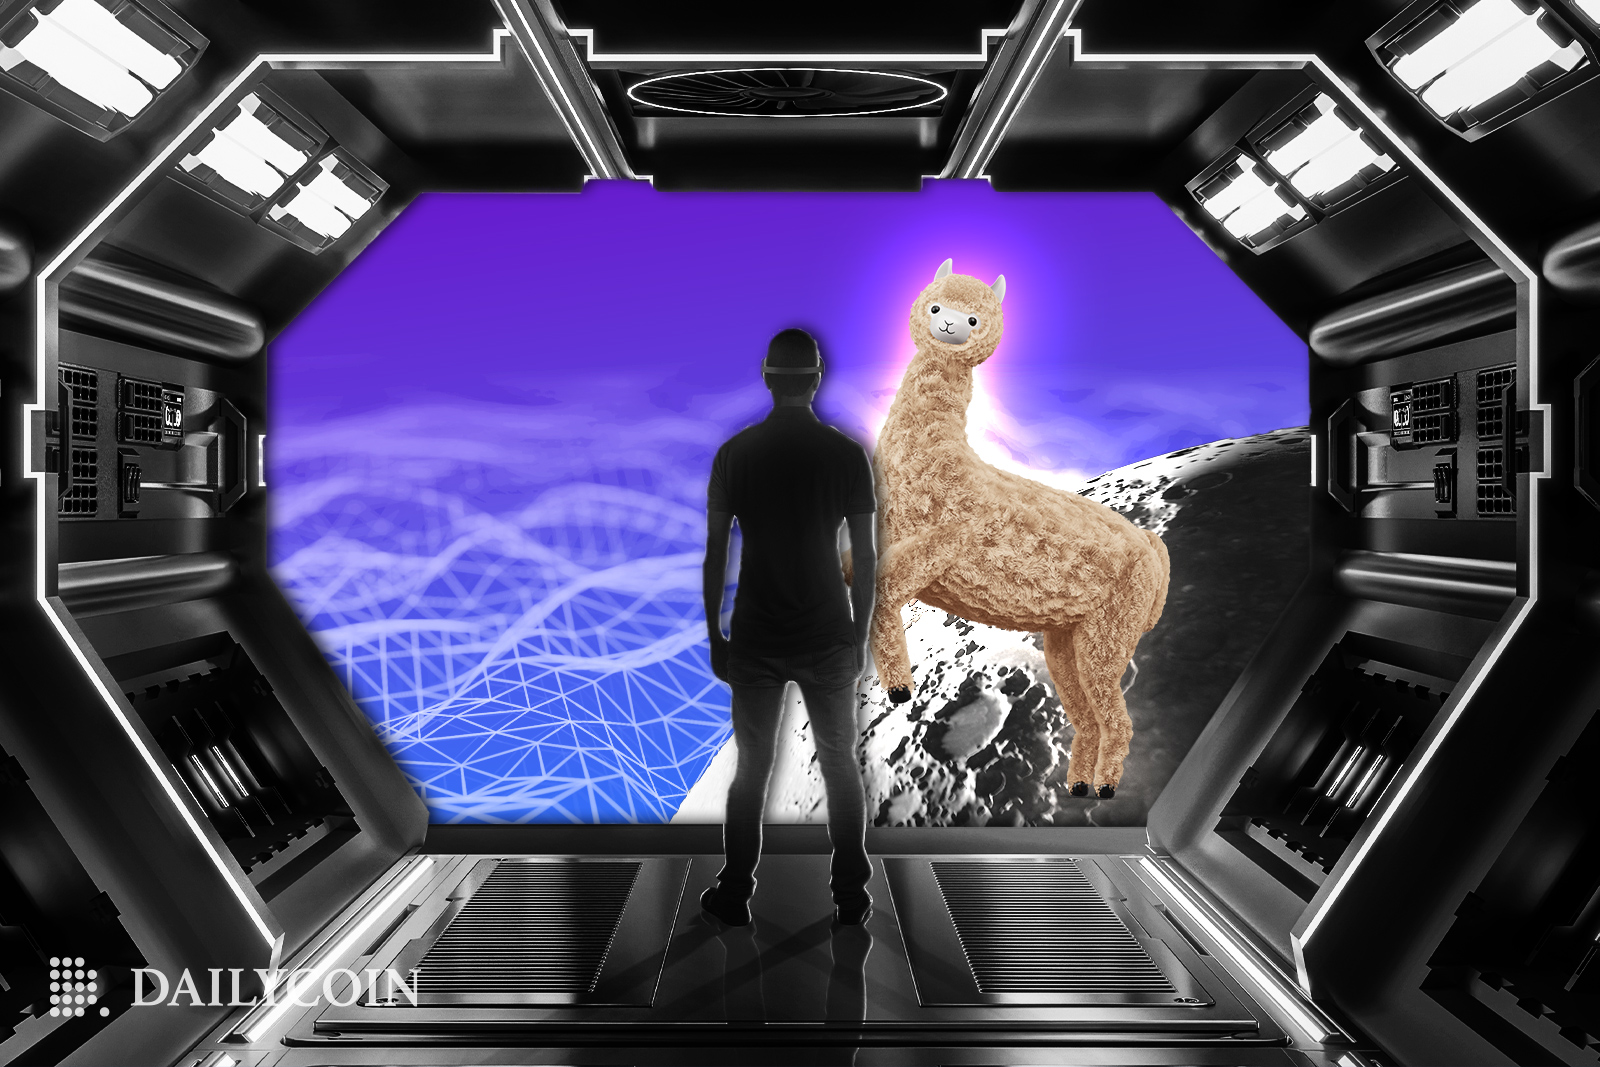 Human standing at the edge of a futuristic spaceship next to a glowing lama.